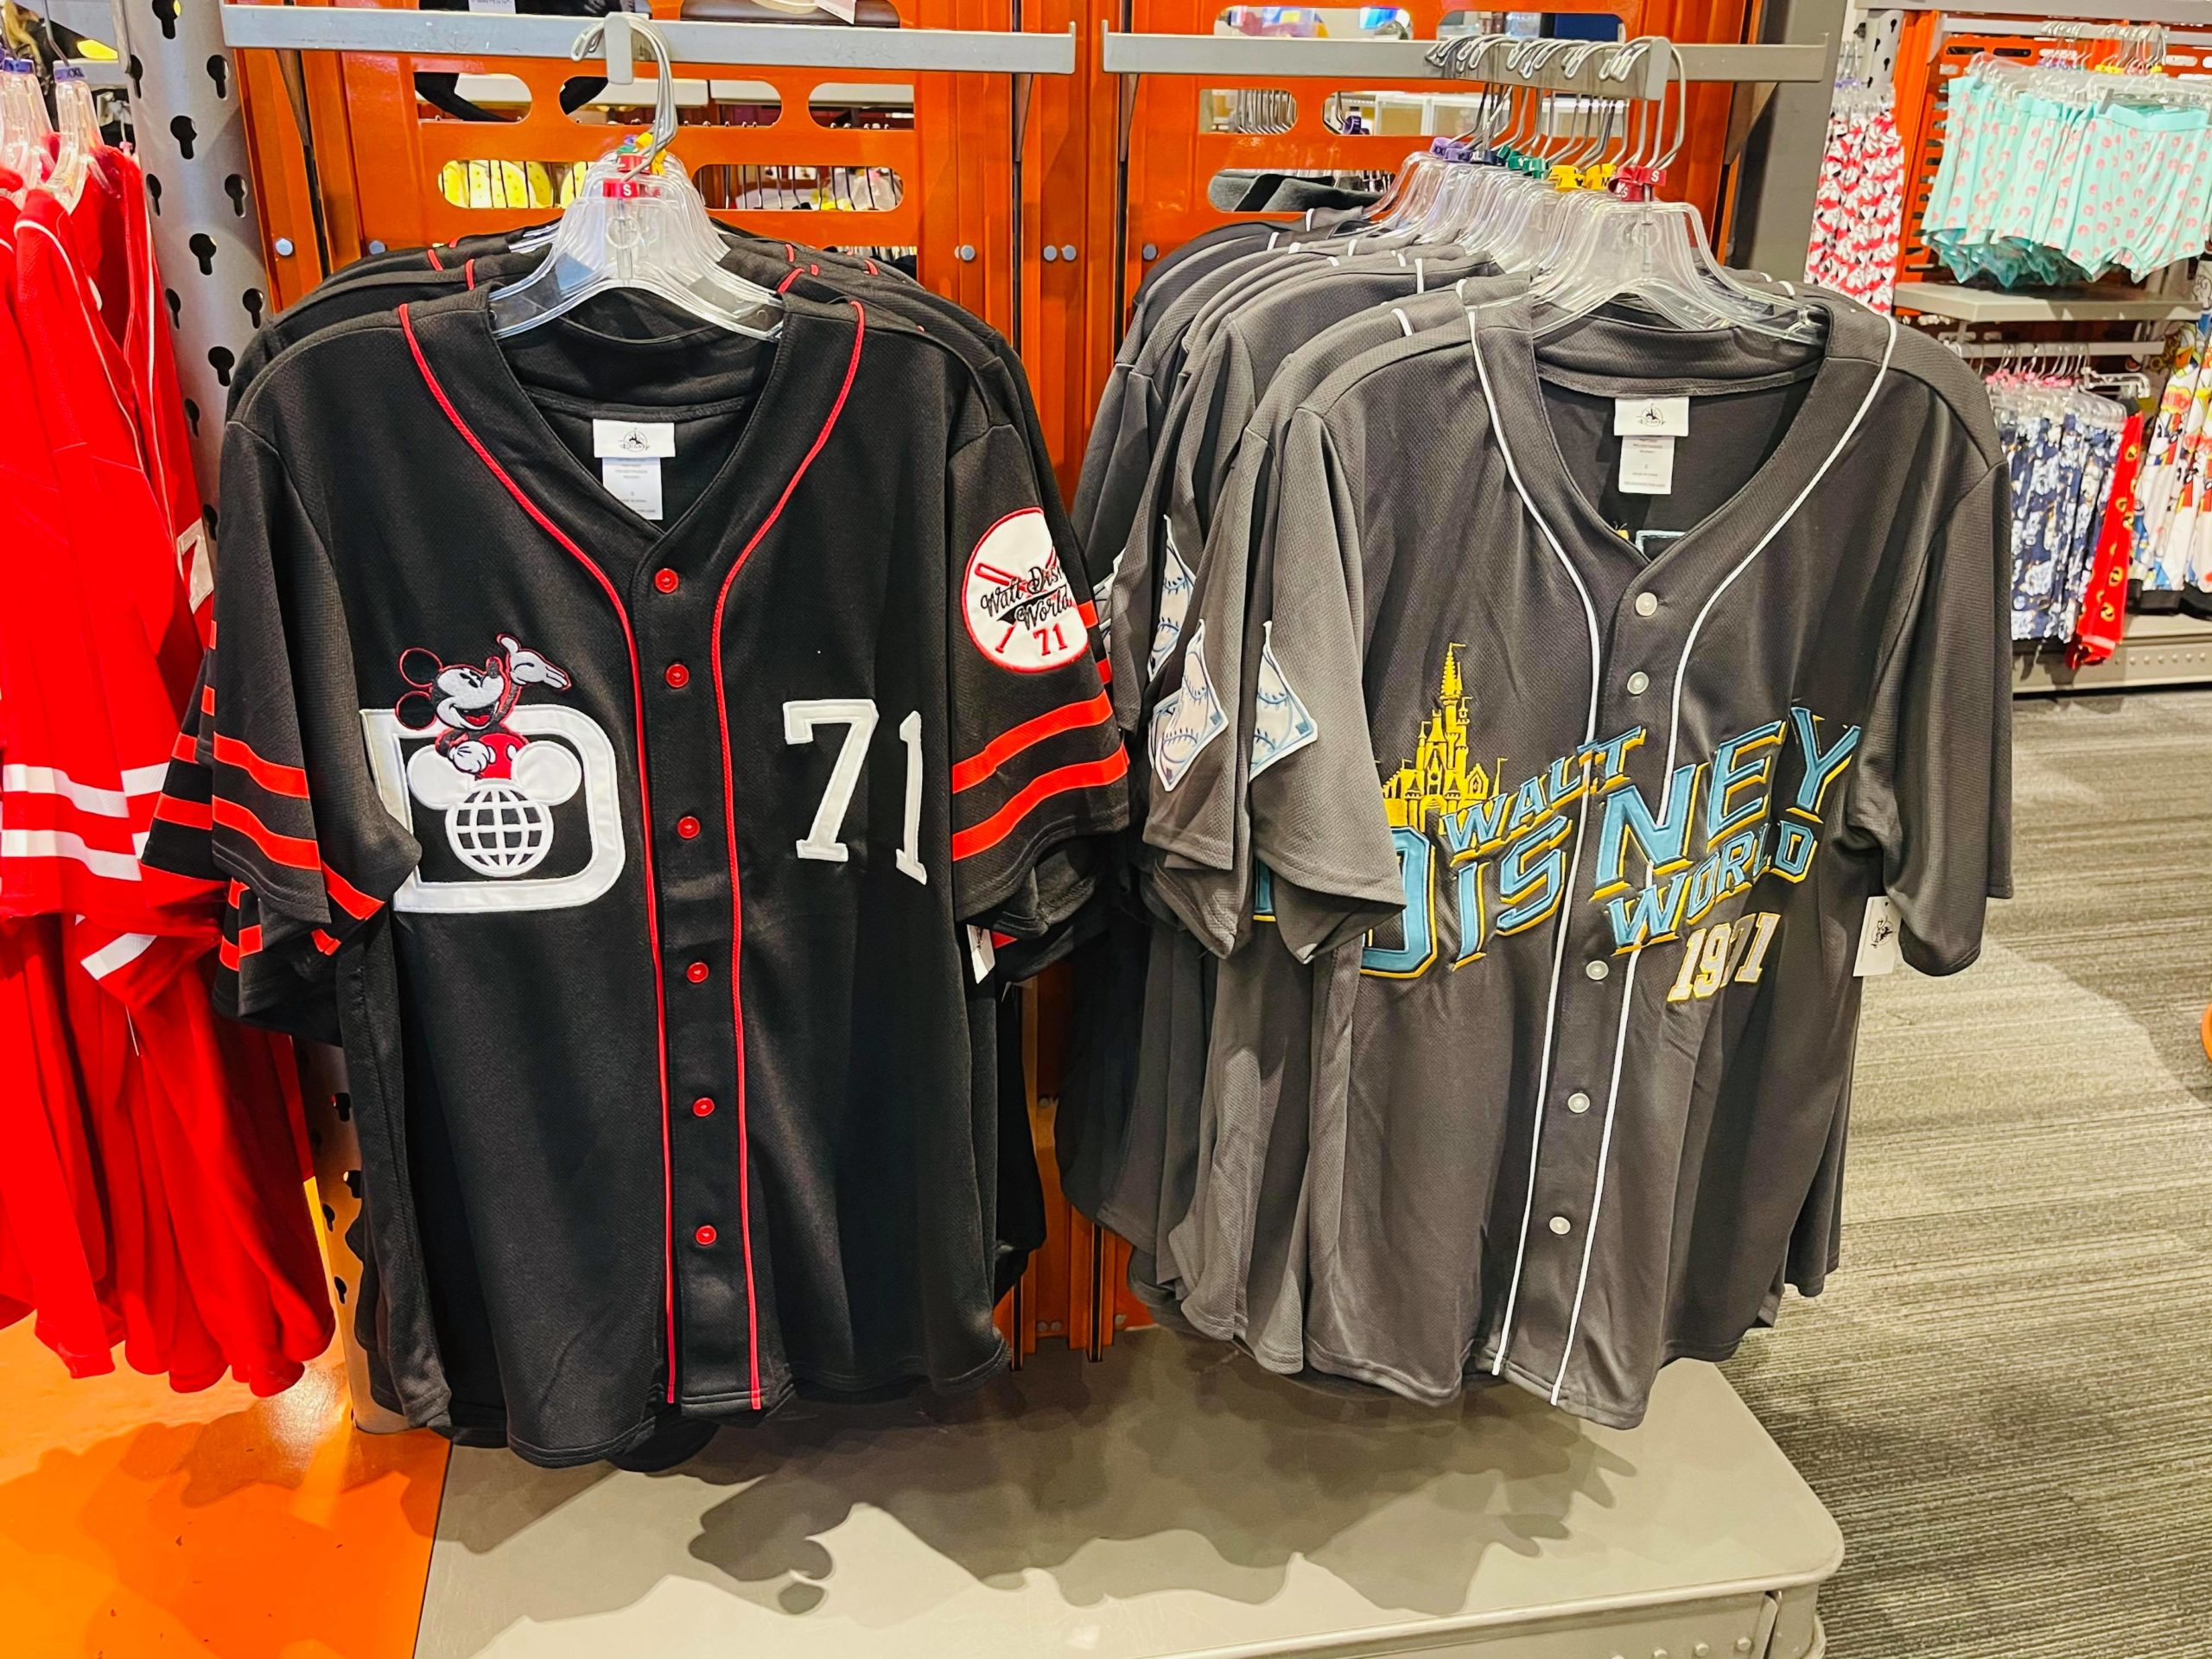 Mickey And Friends Baseball Jersey Spotted At Hollywood Studios